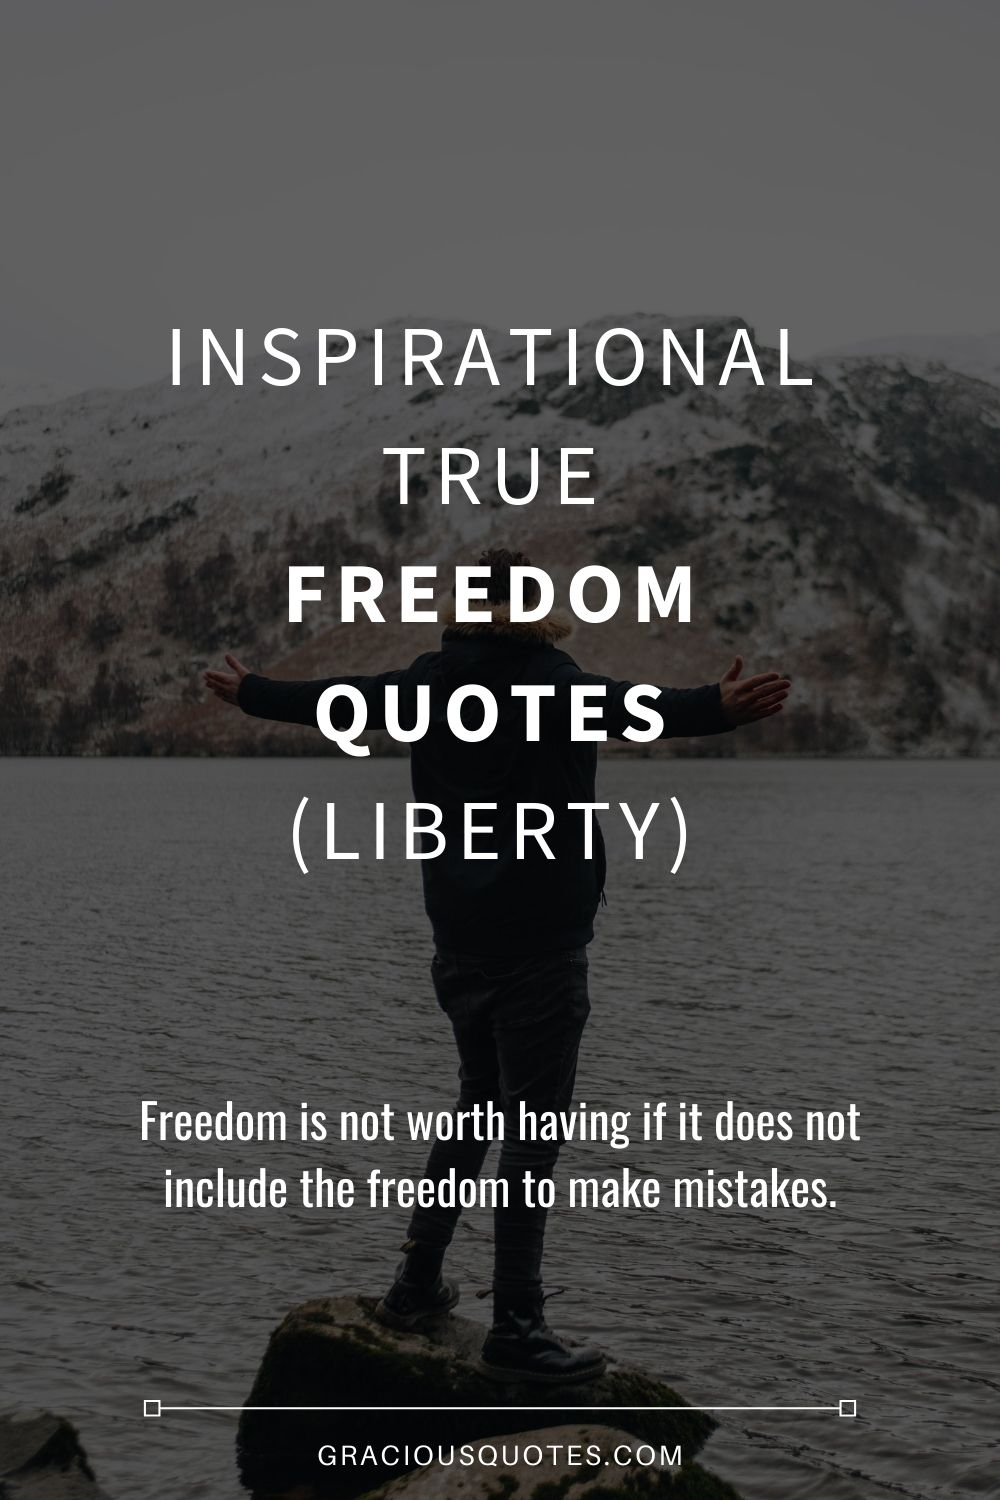 Inspirational True Freedom Quotes (LIBERTY) - Gracious Quotes